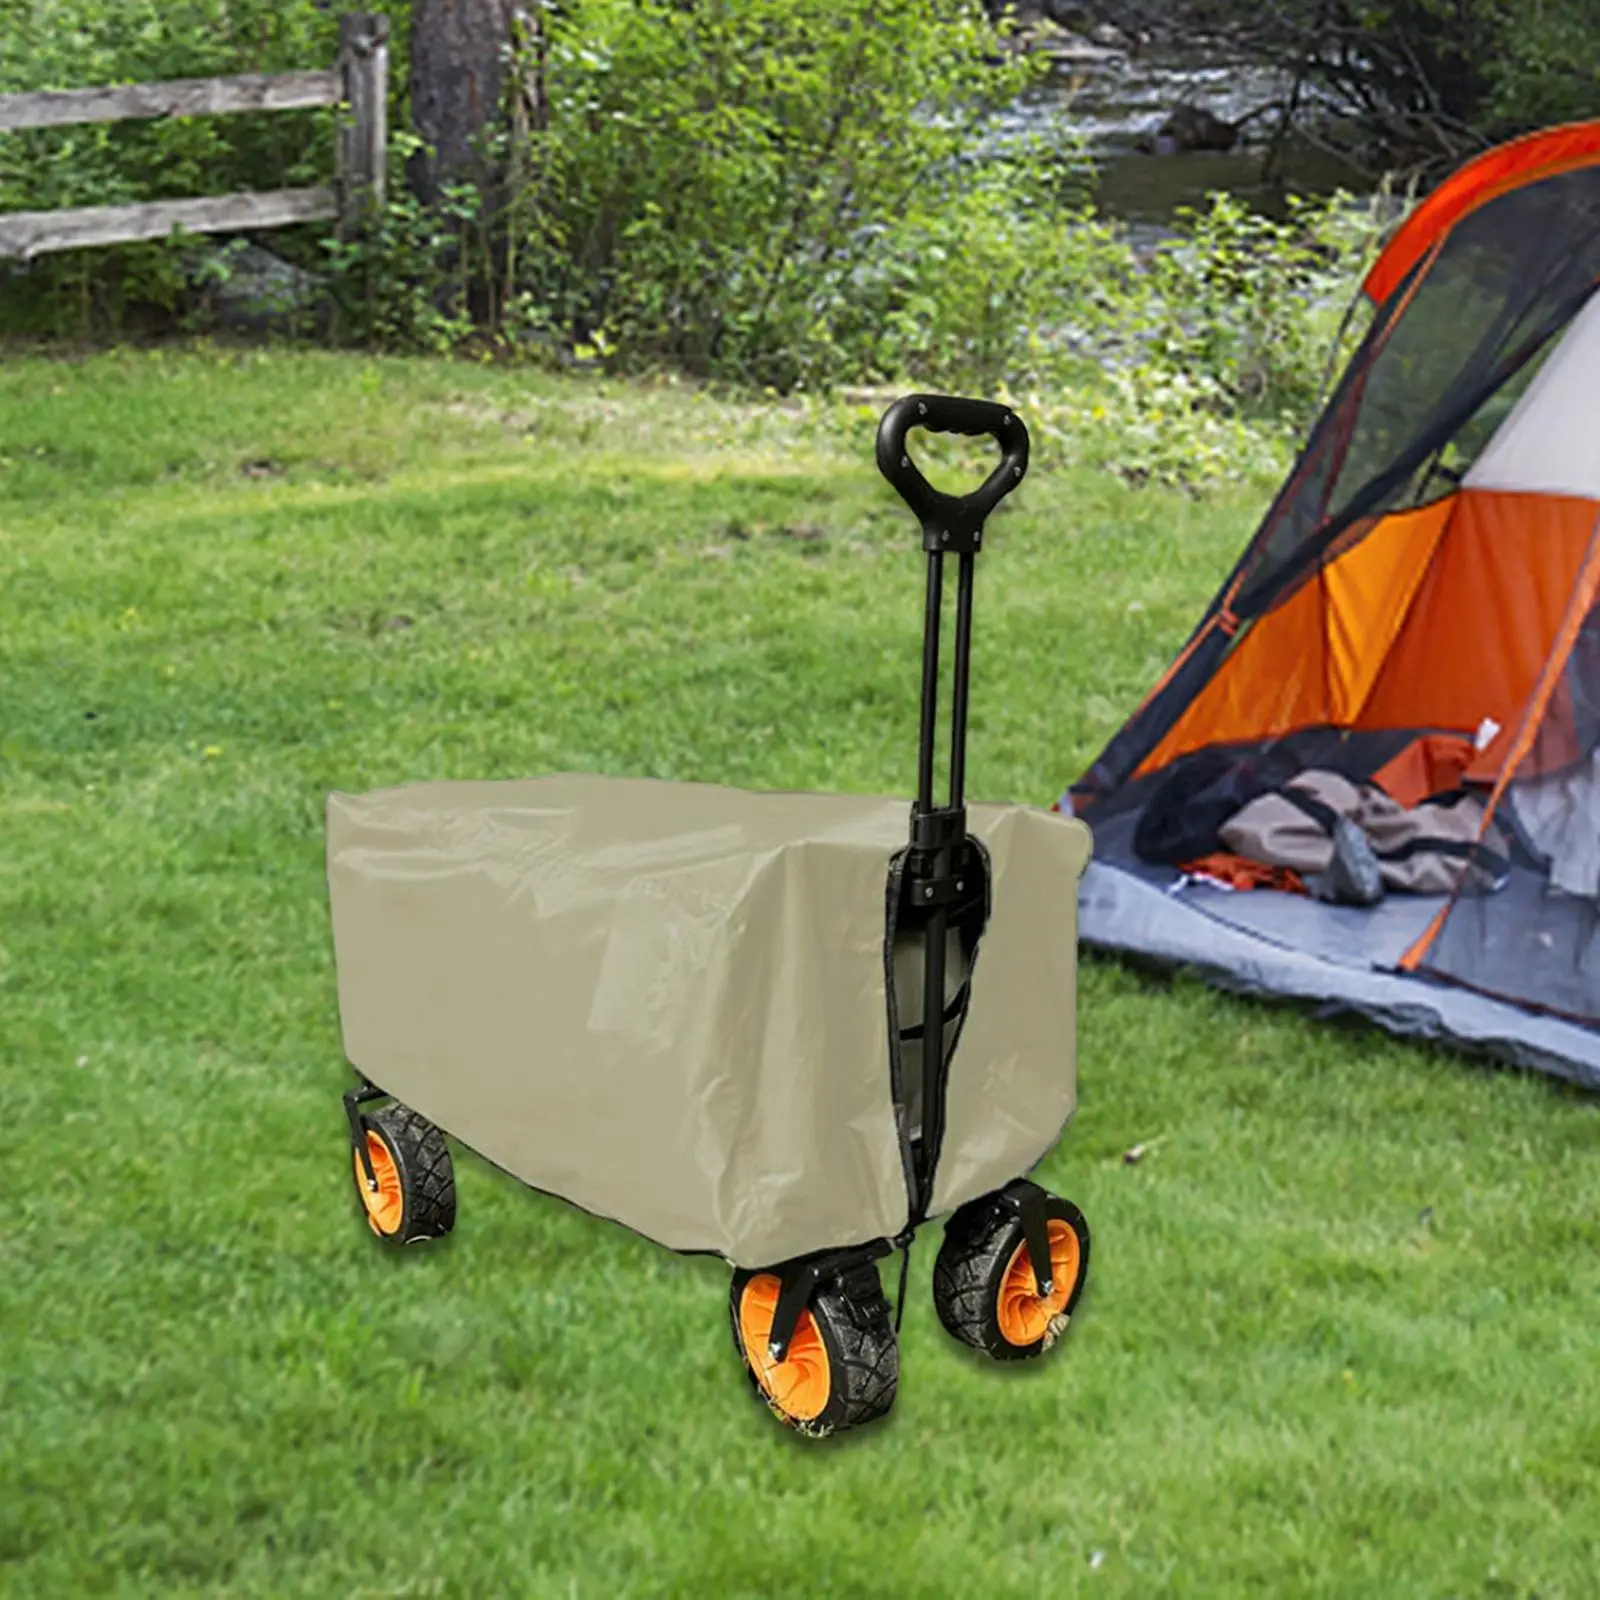 Garden Wagon Cart Cover Dustproof Cover 90x50x45cm with Drawstring Around The Bottom Oxford Fabric for Collapsible Utility Wagon